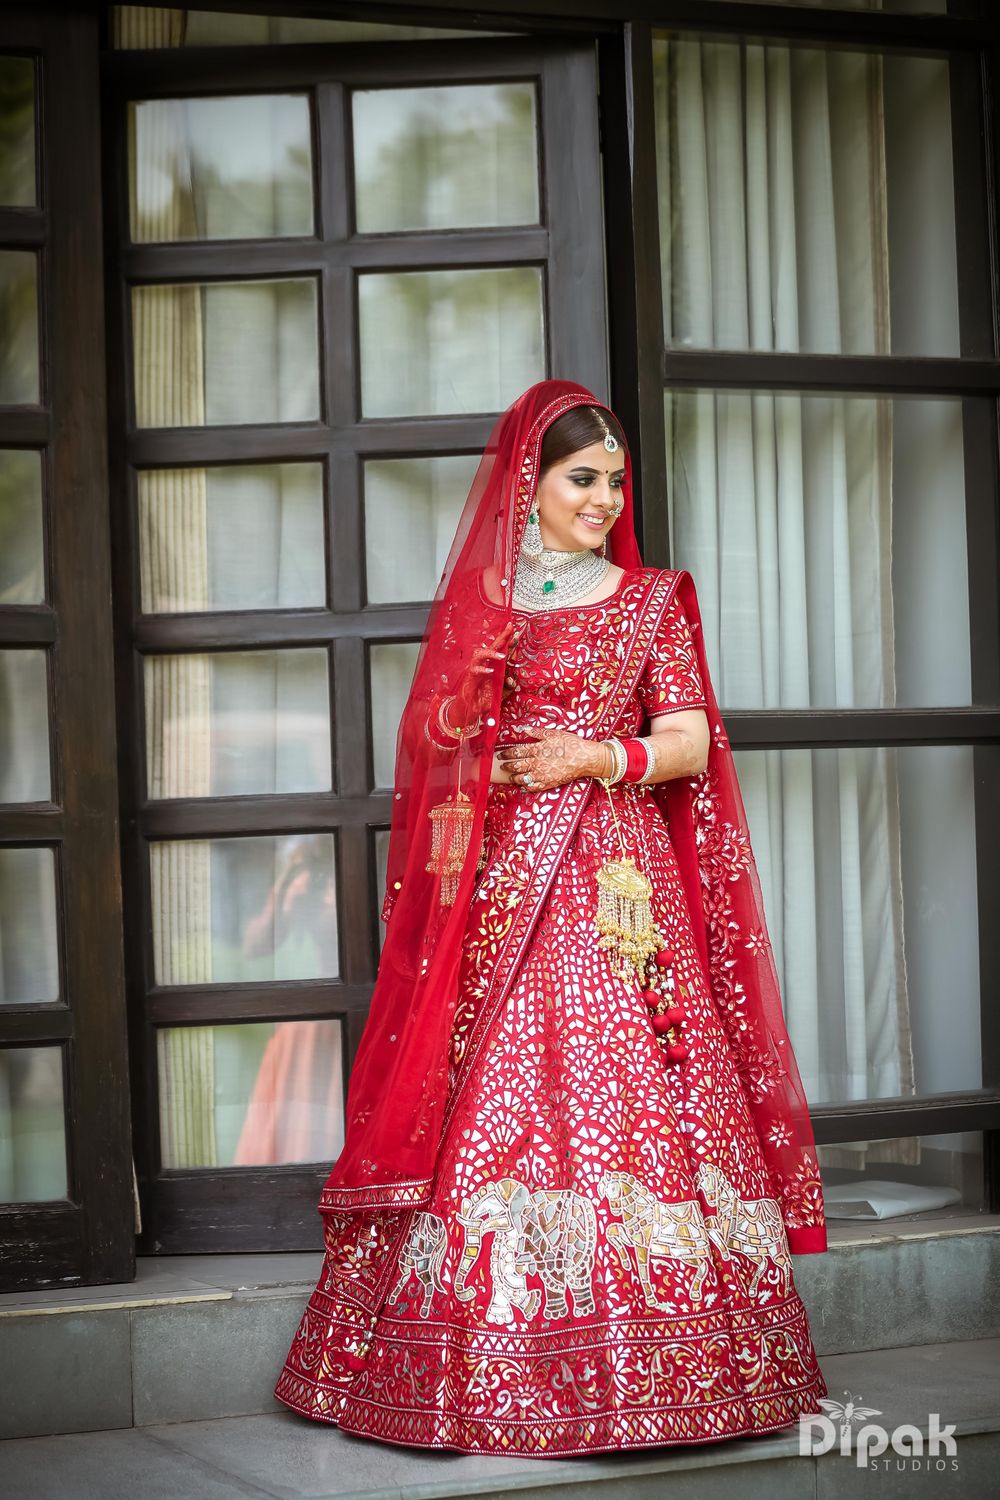 Photo of Unique dulle red lehenga for Wedding